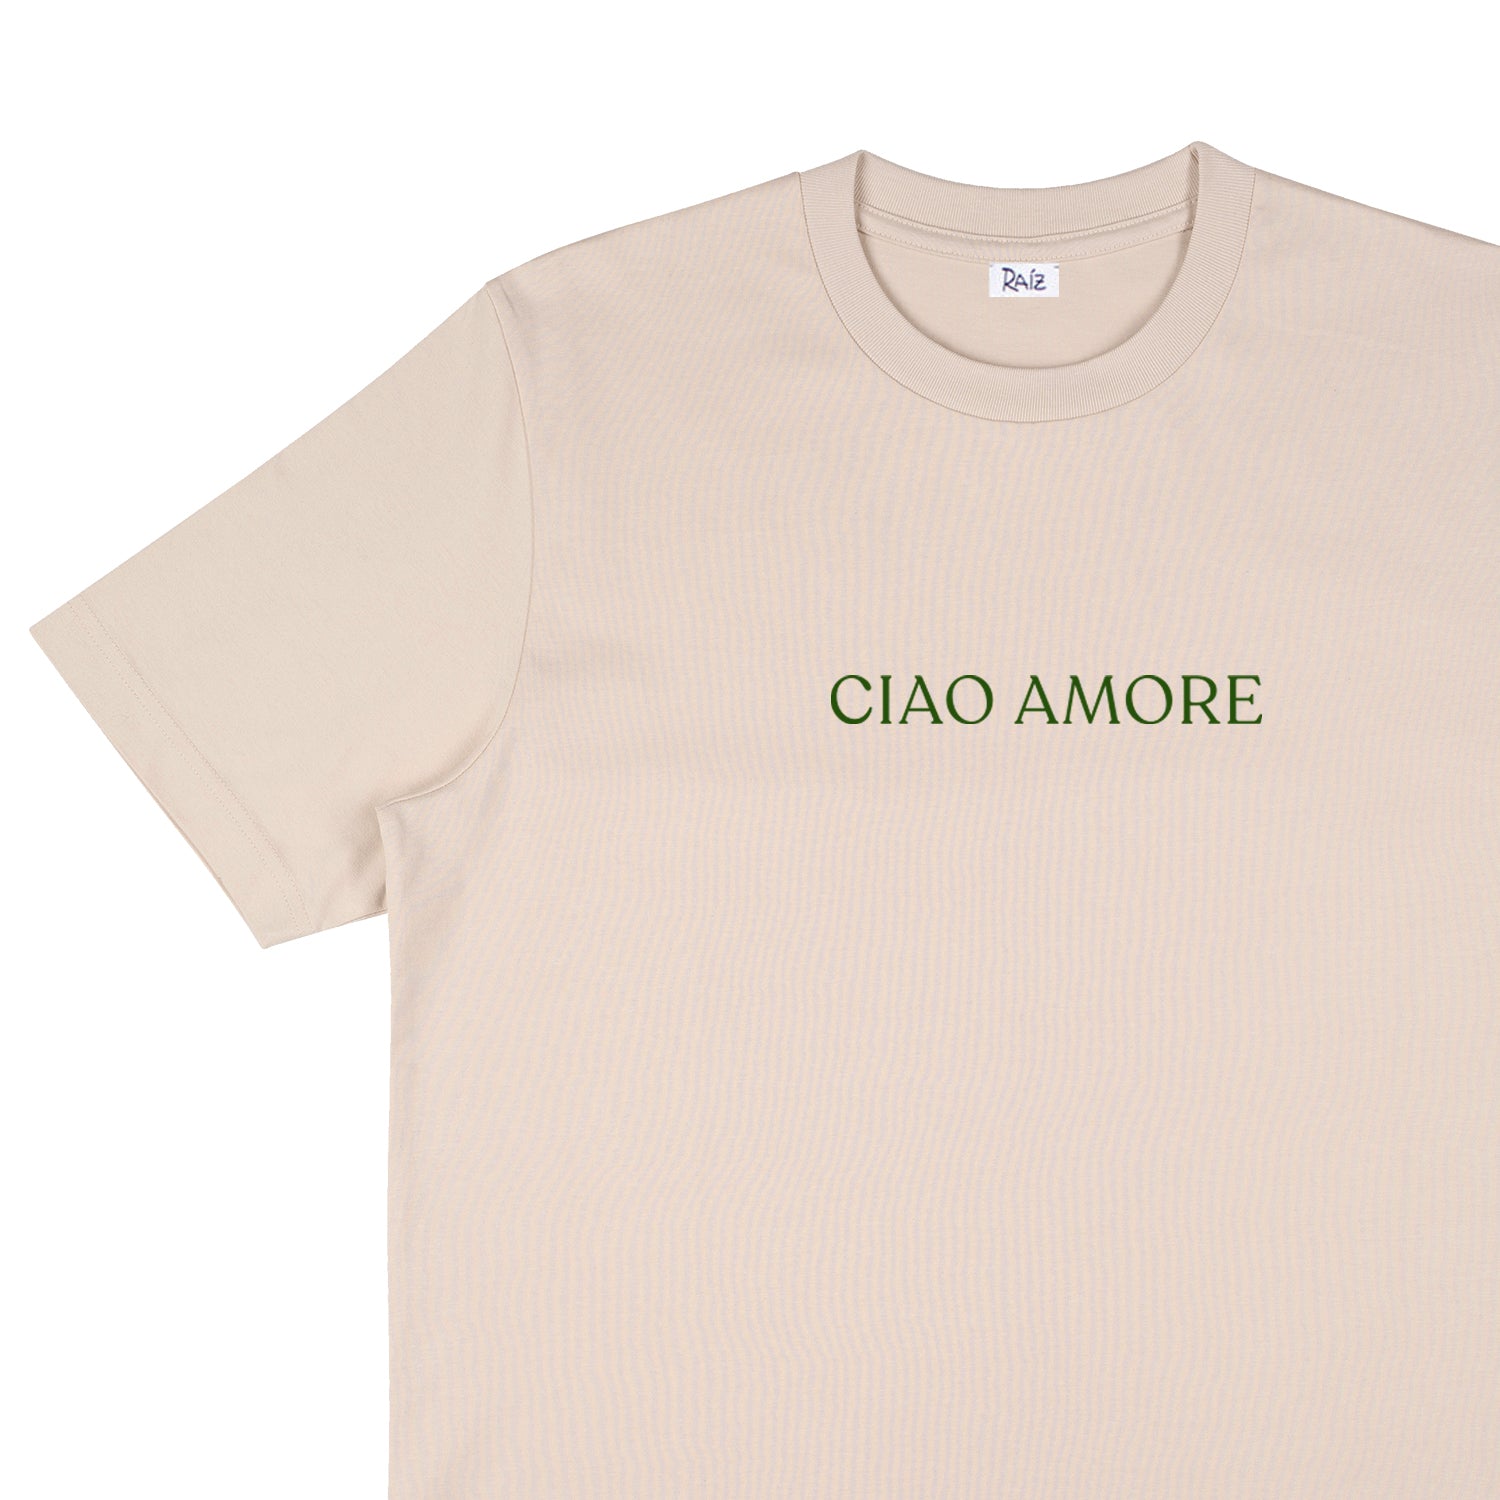 CIAO AMORE T-SHIRT